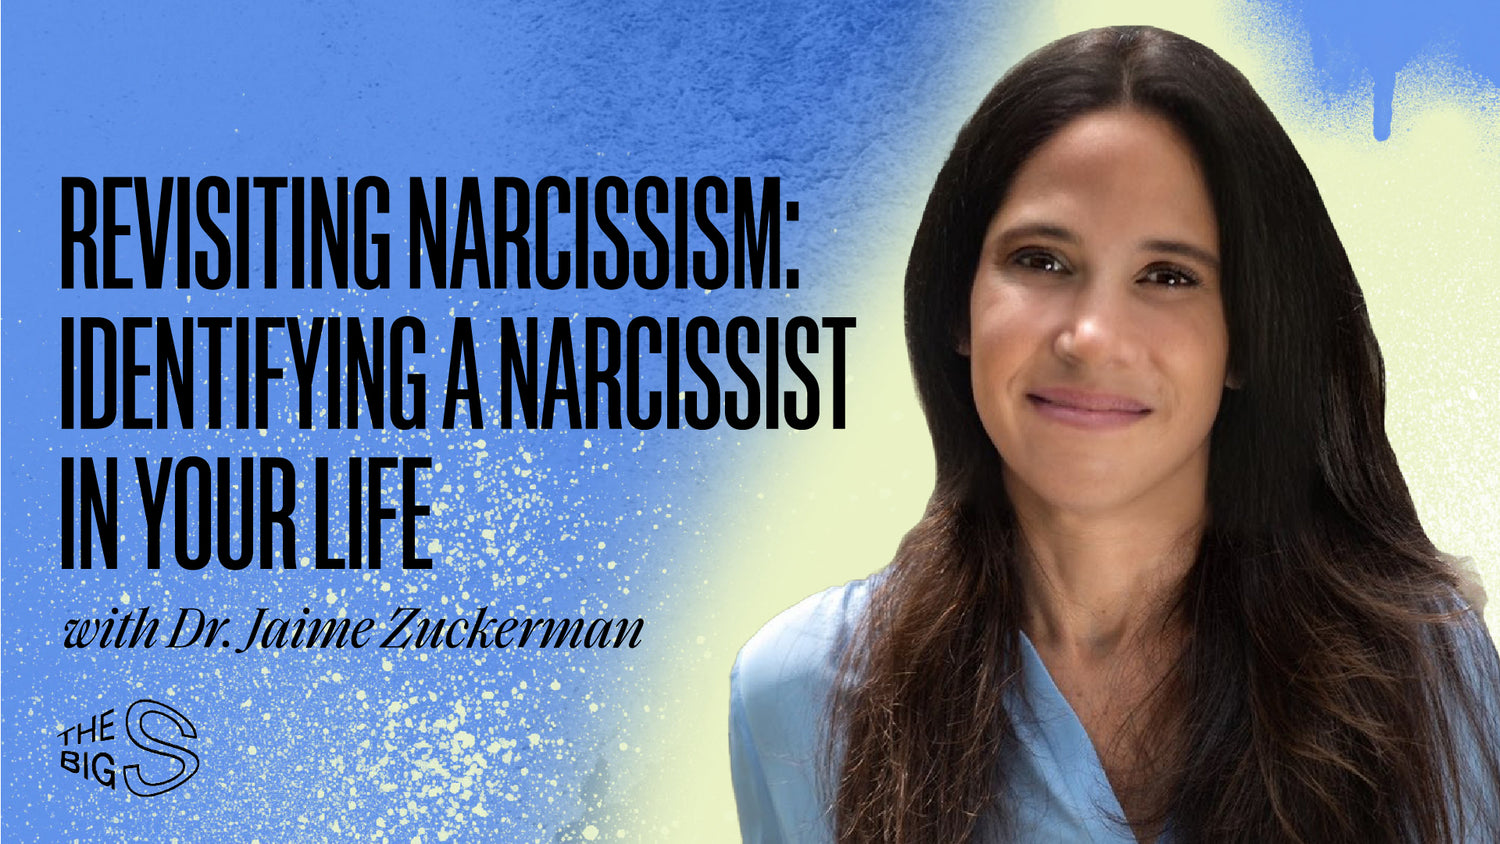 79. REVISITING NARCISSISM: IDENTIFYING A NARCISSIST IN YOUR LIFE WITH DR. JAIME ZUCKERMAN